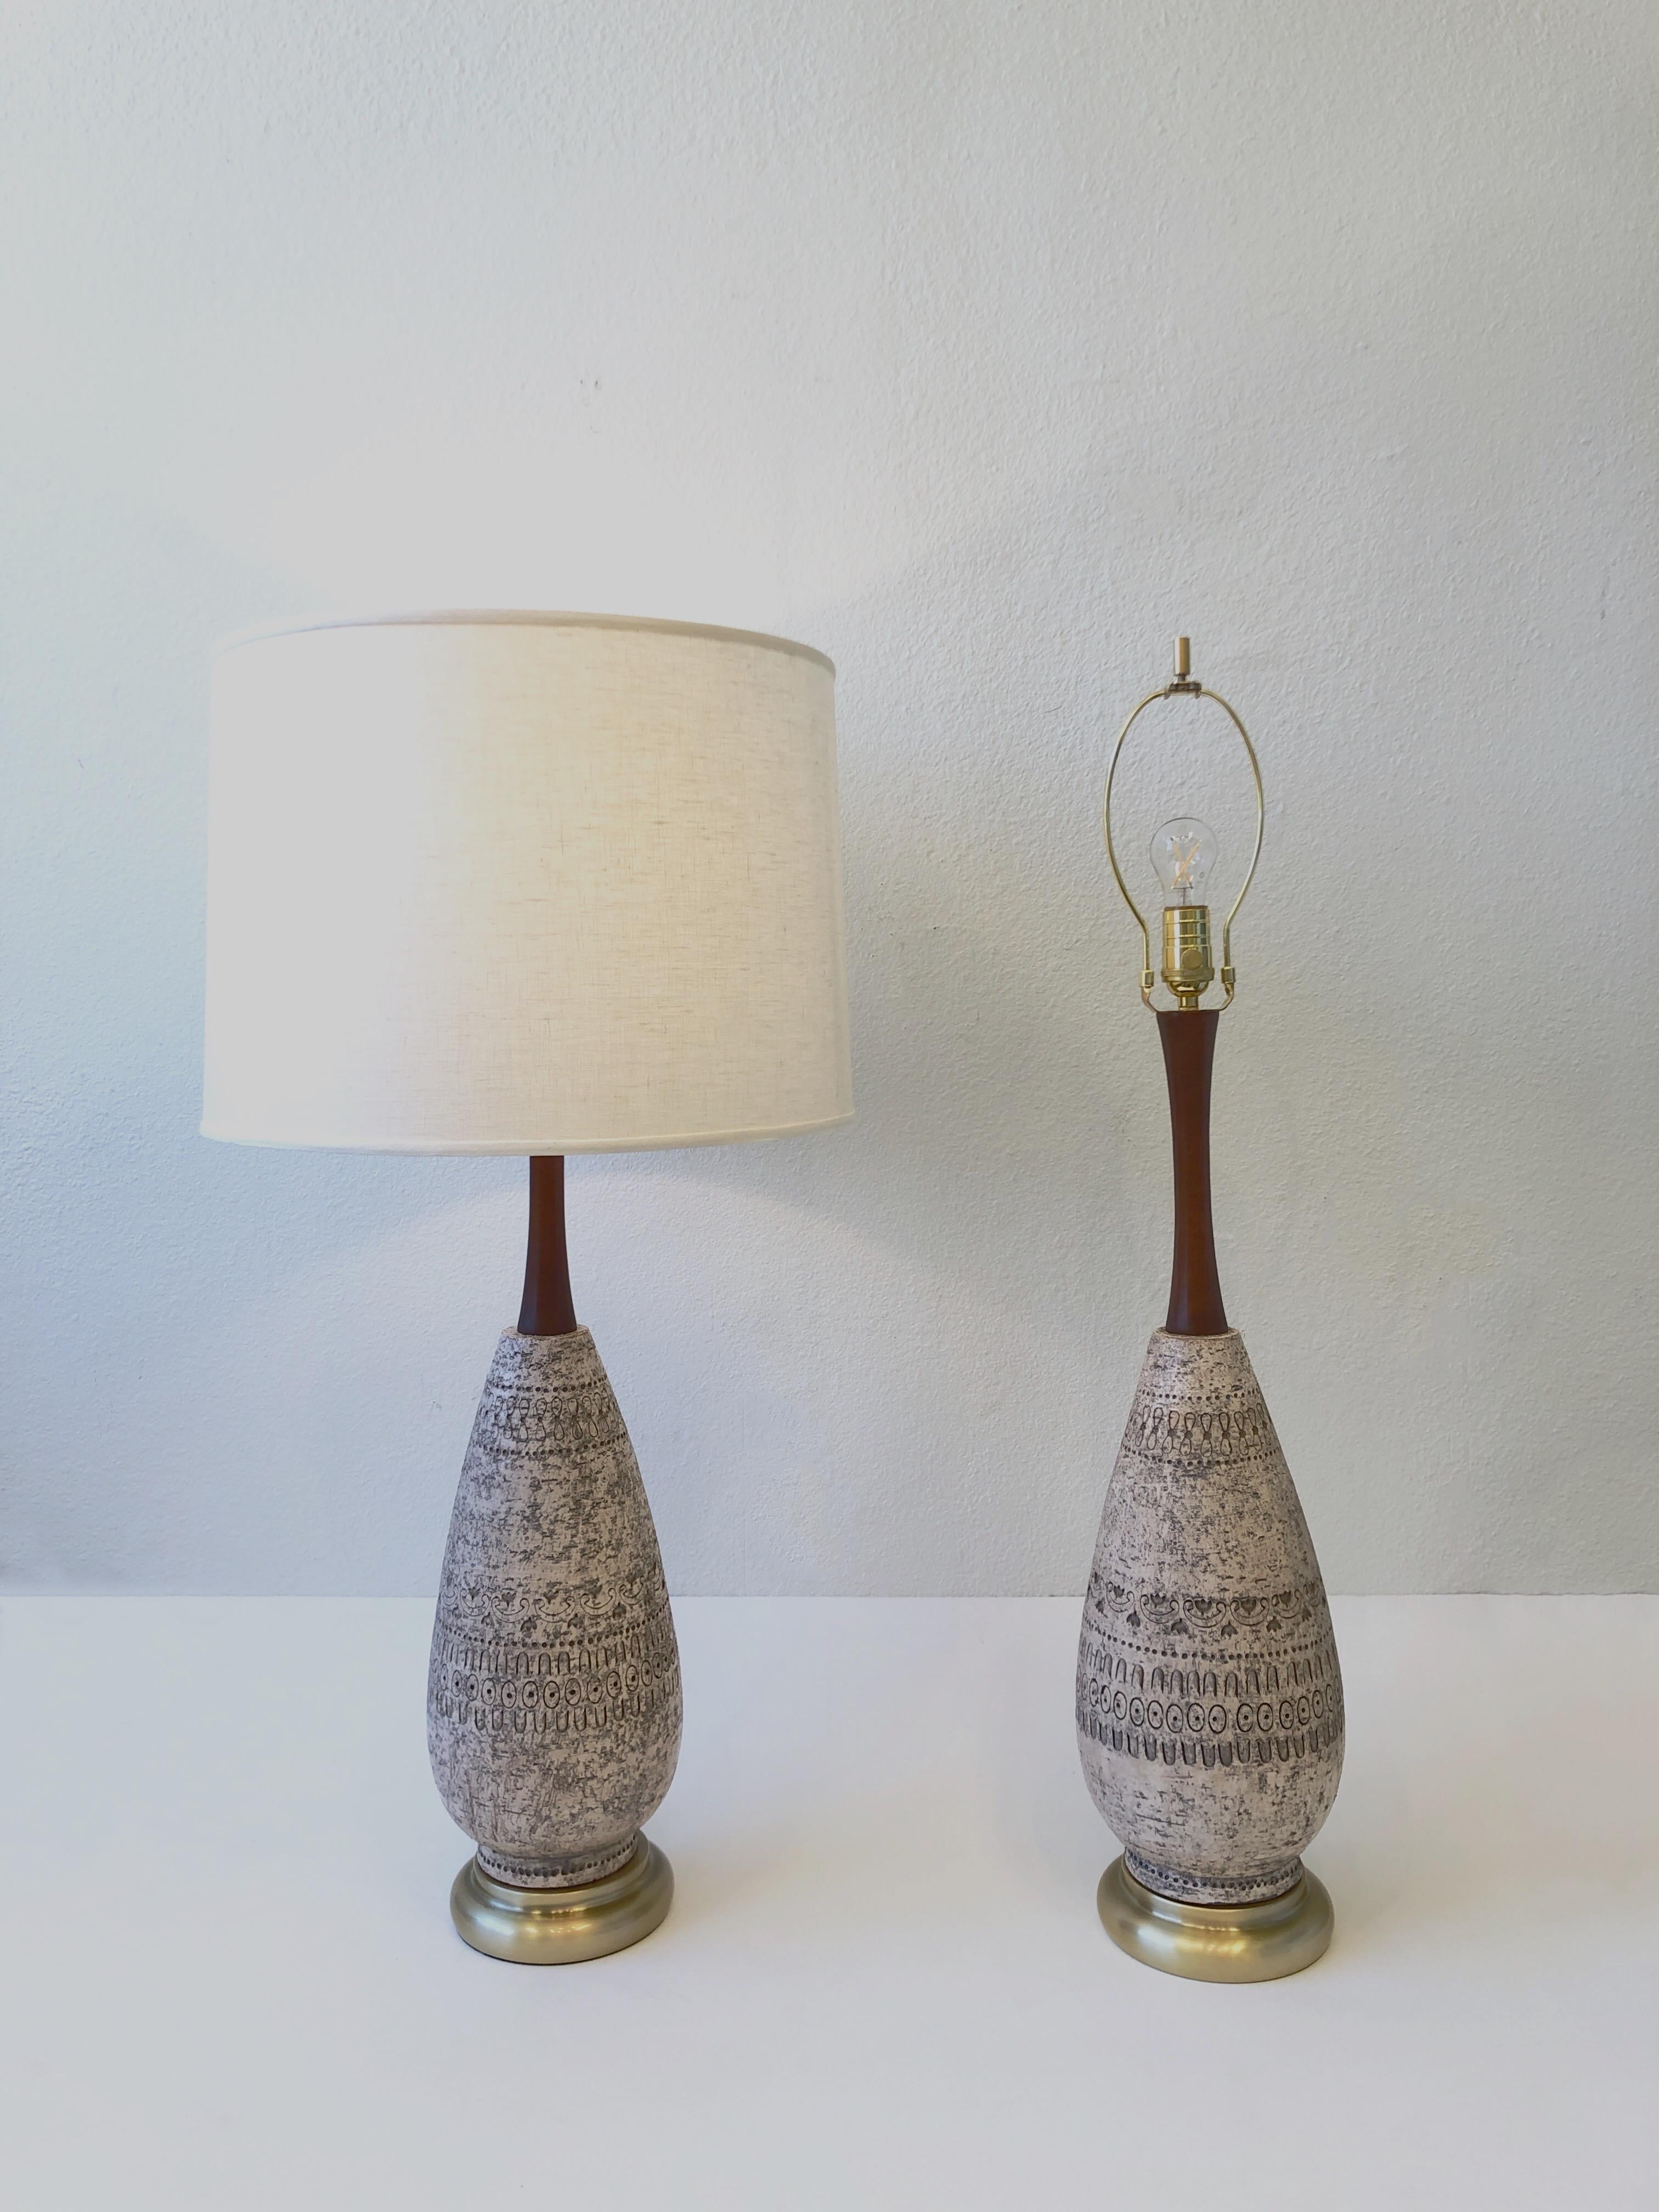 Pair of Italian ceramic and brass table lamps by Bitossi.
Constructed of glazed ceramic, satin brass base, walnut wood and linen. 
It takes one regular Edison lightbulb 100w max. Dimmer can be added if desired. 
Newly rewired with new polish